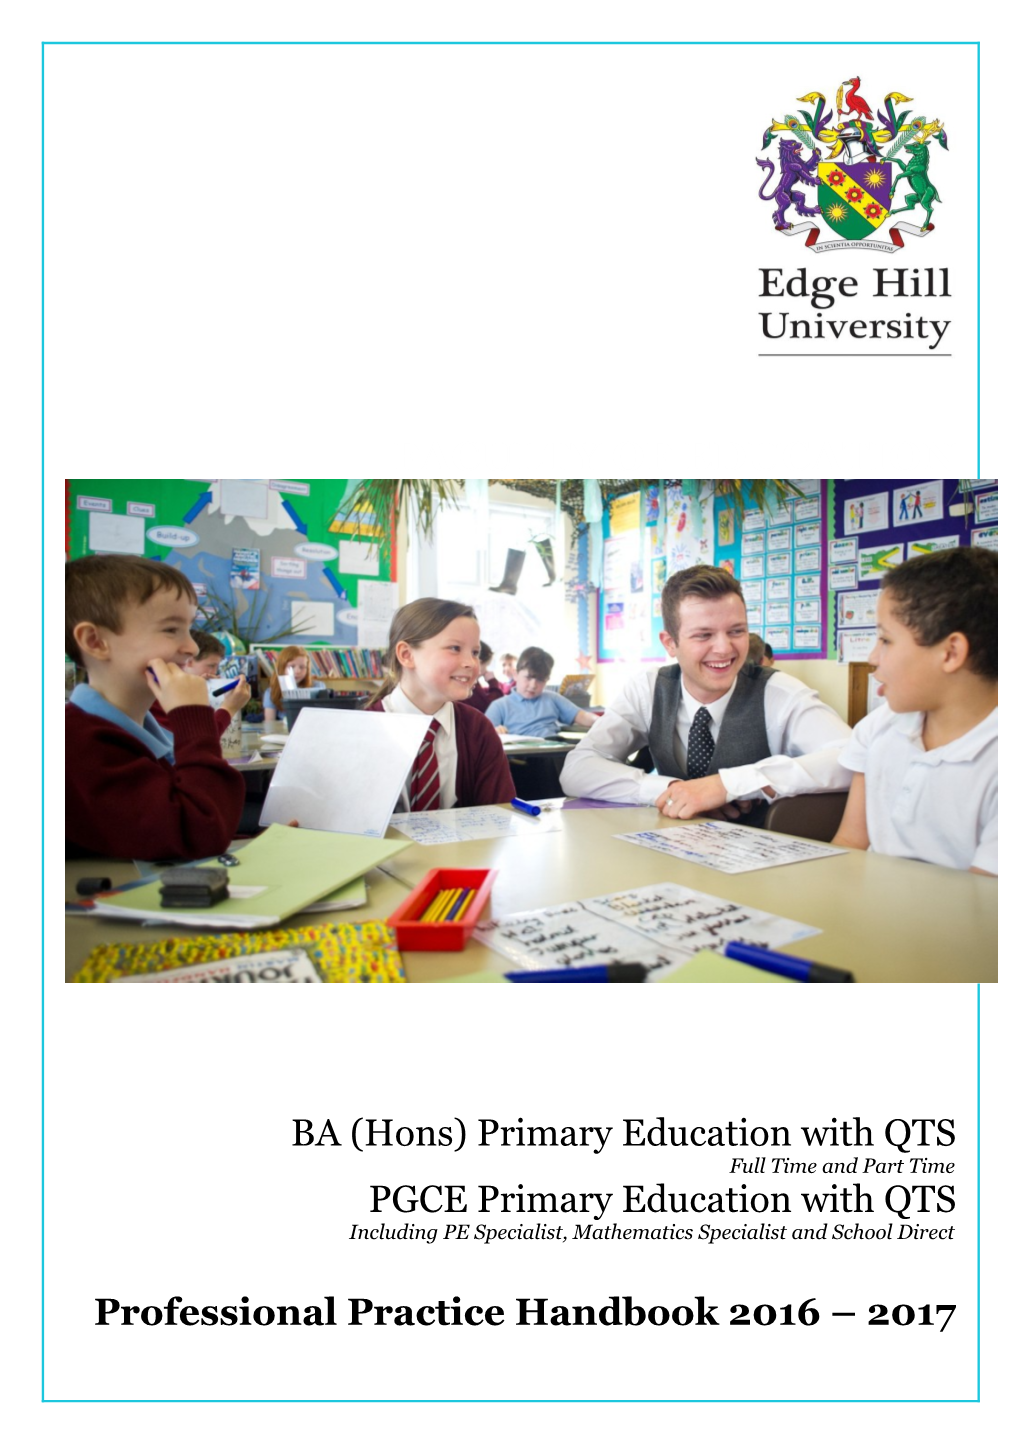 BA (Hons) Primary Education with QTS